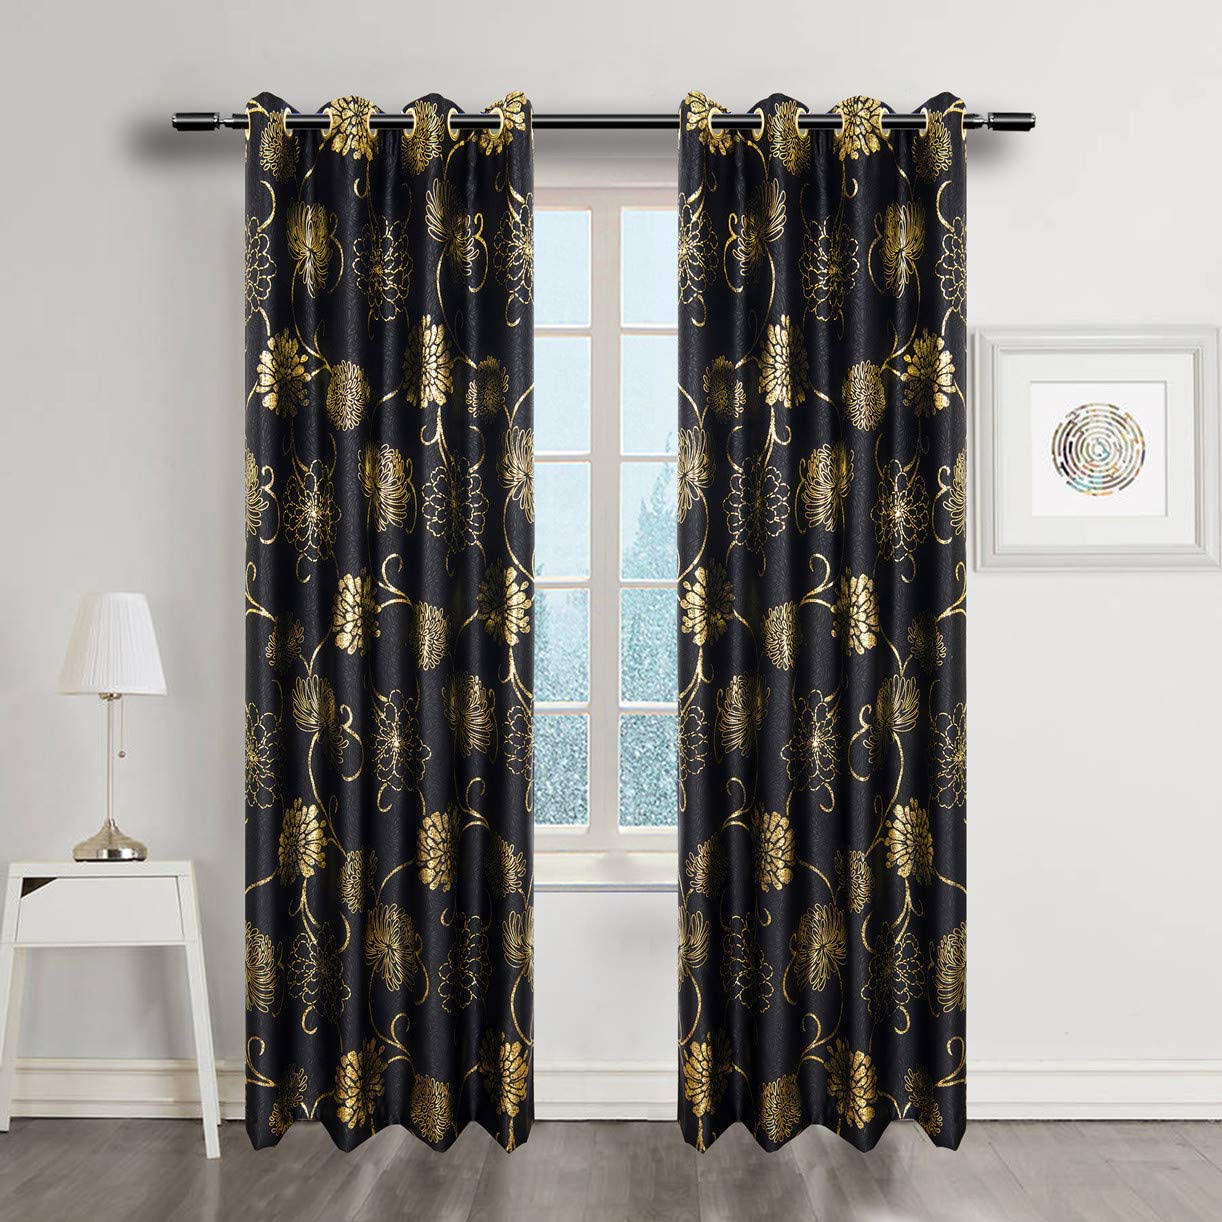 MYRU Black and Gold Blackout Curtains for Bedroom, Luxury Flower ...